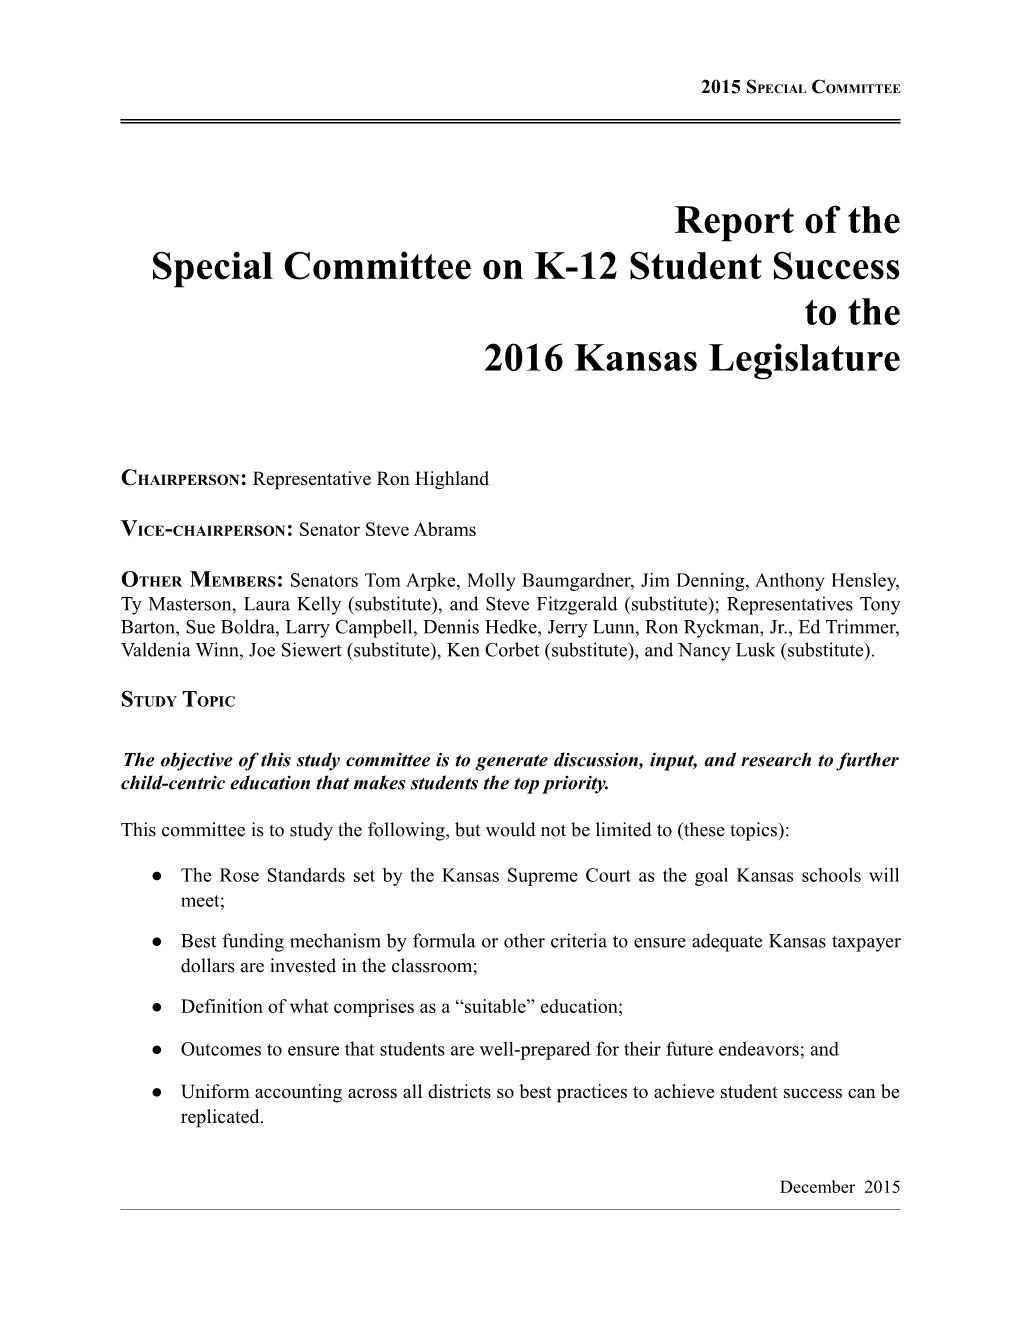 Report of the Special Committee on K 12 Student Success to the 2016